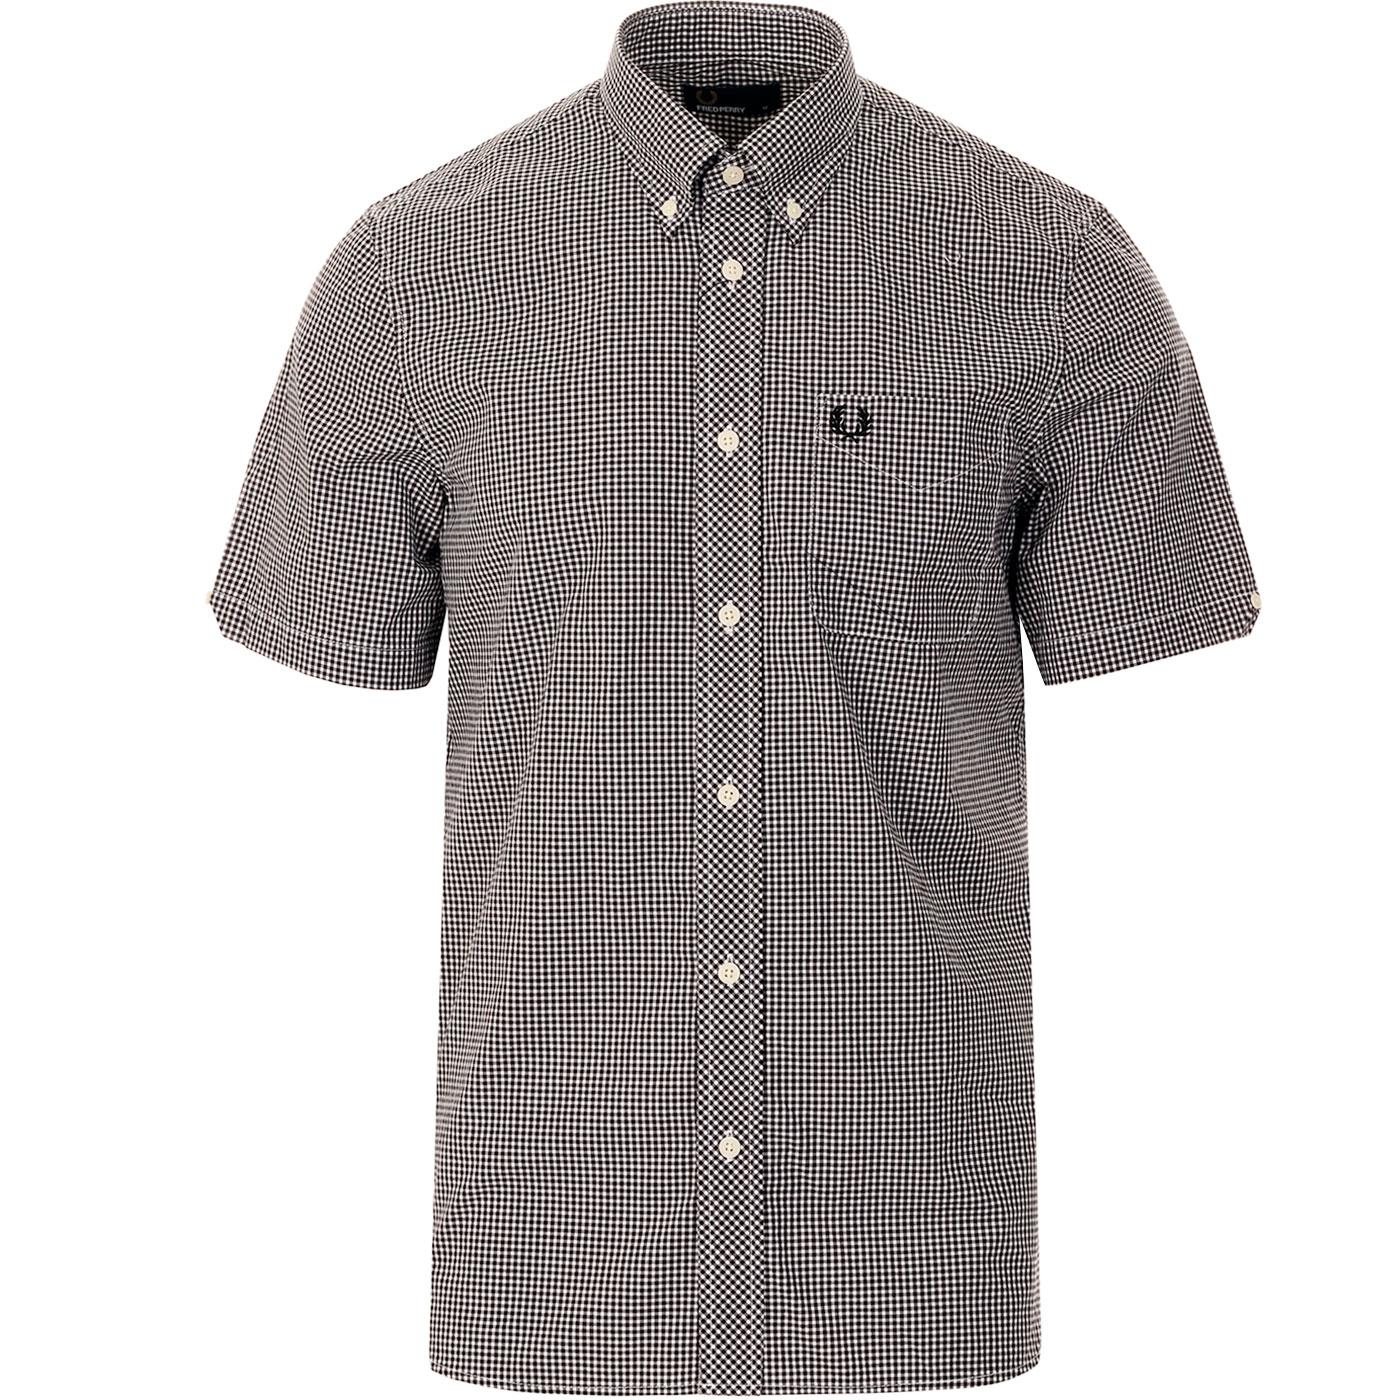 FRED PERRY S/S Retro Mod Gingham Check Shirt 